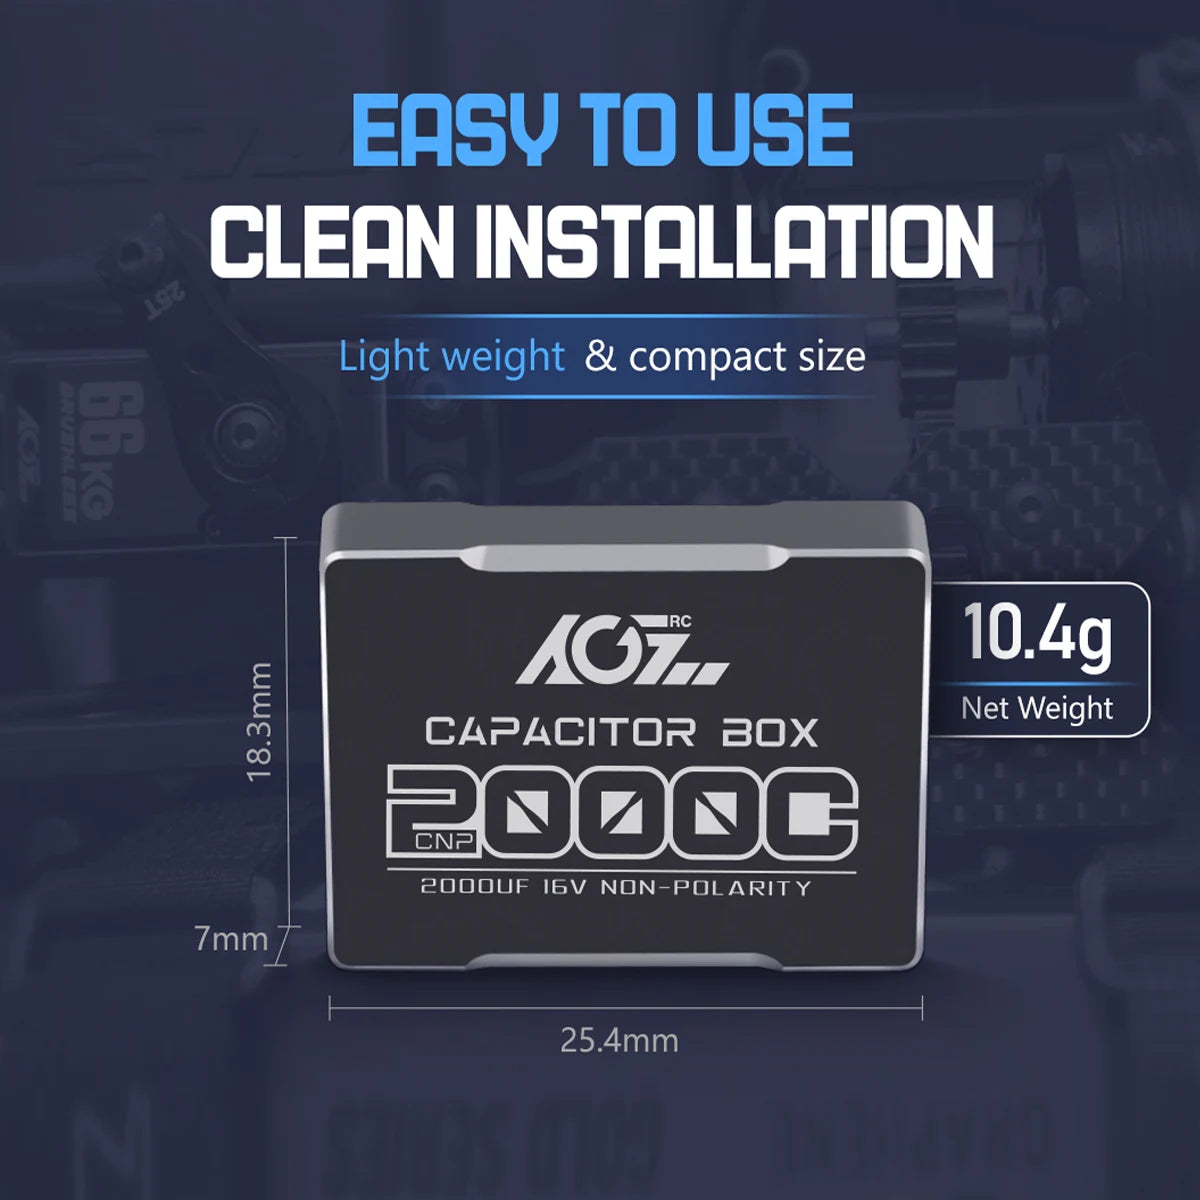 EasV to USE CLEAN INSTALLATION Light weight & compact size